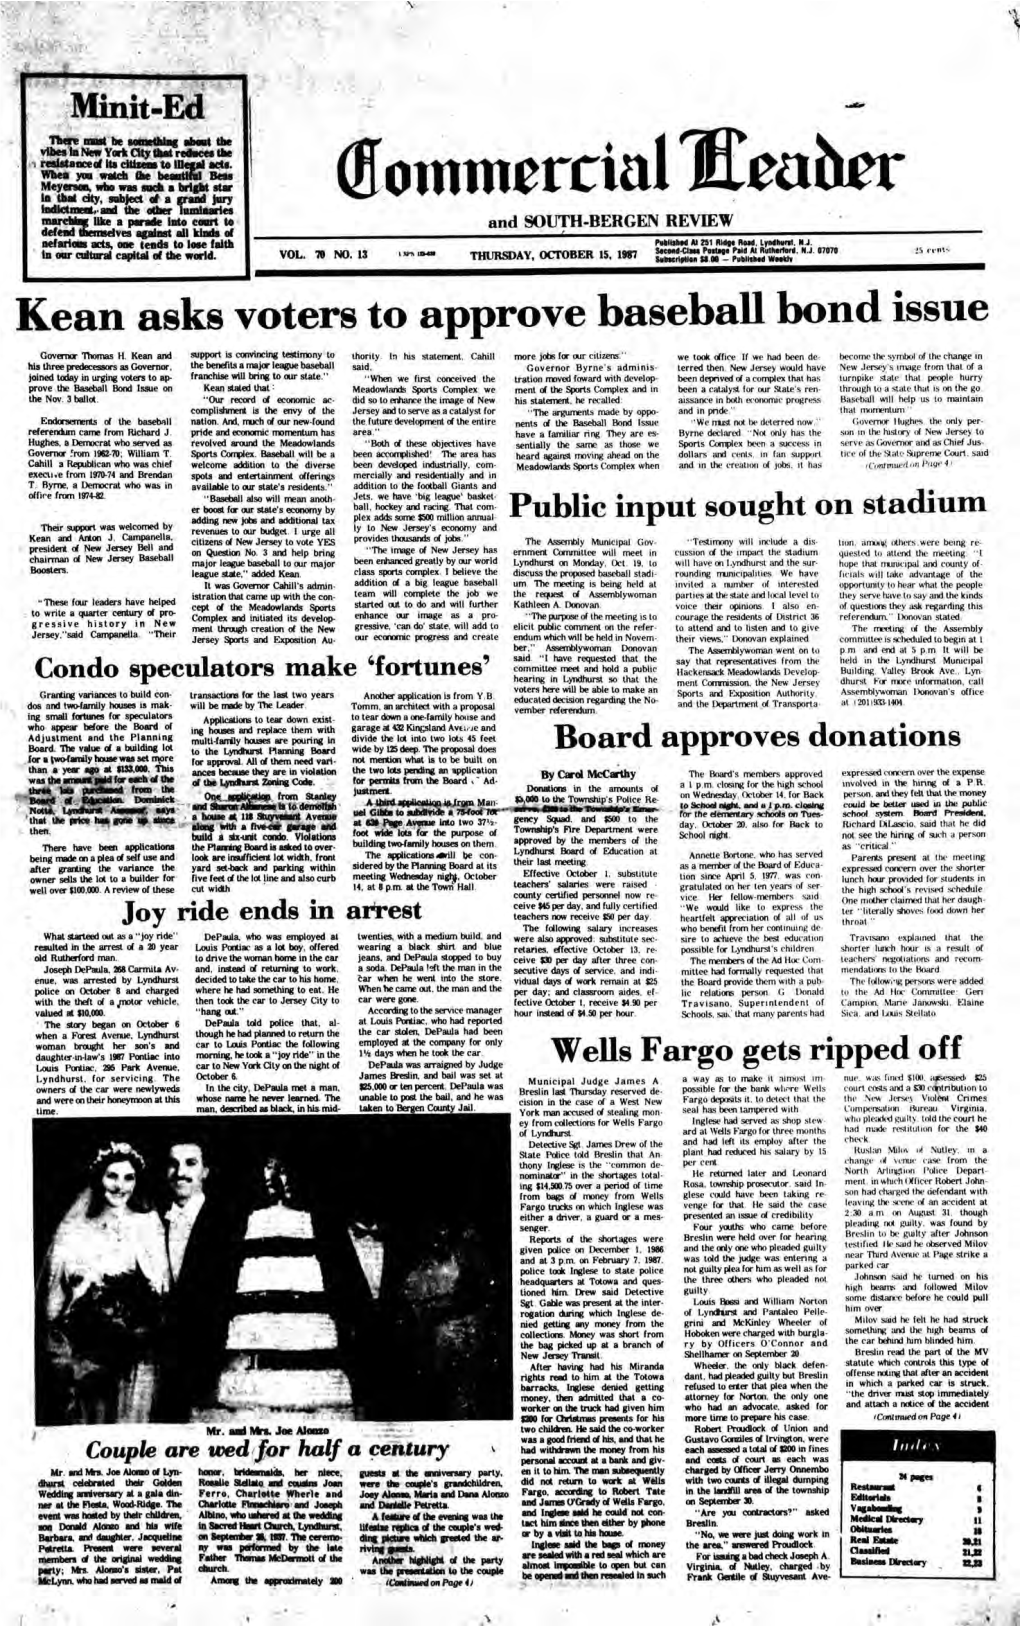 Kean Asks Voters to Approve Baseball Bond Issue